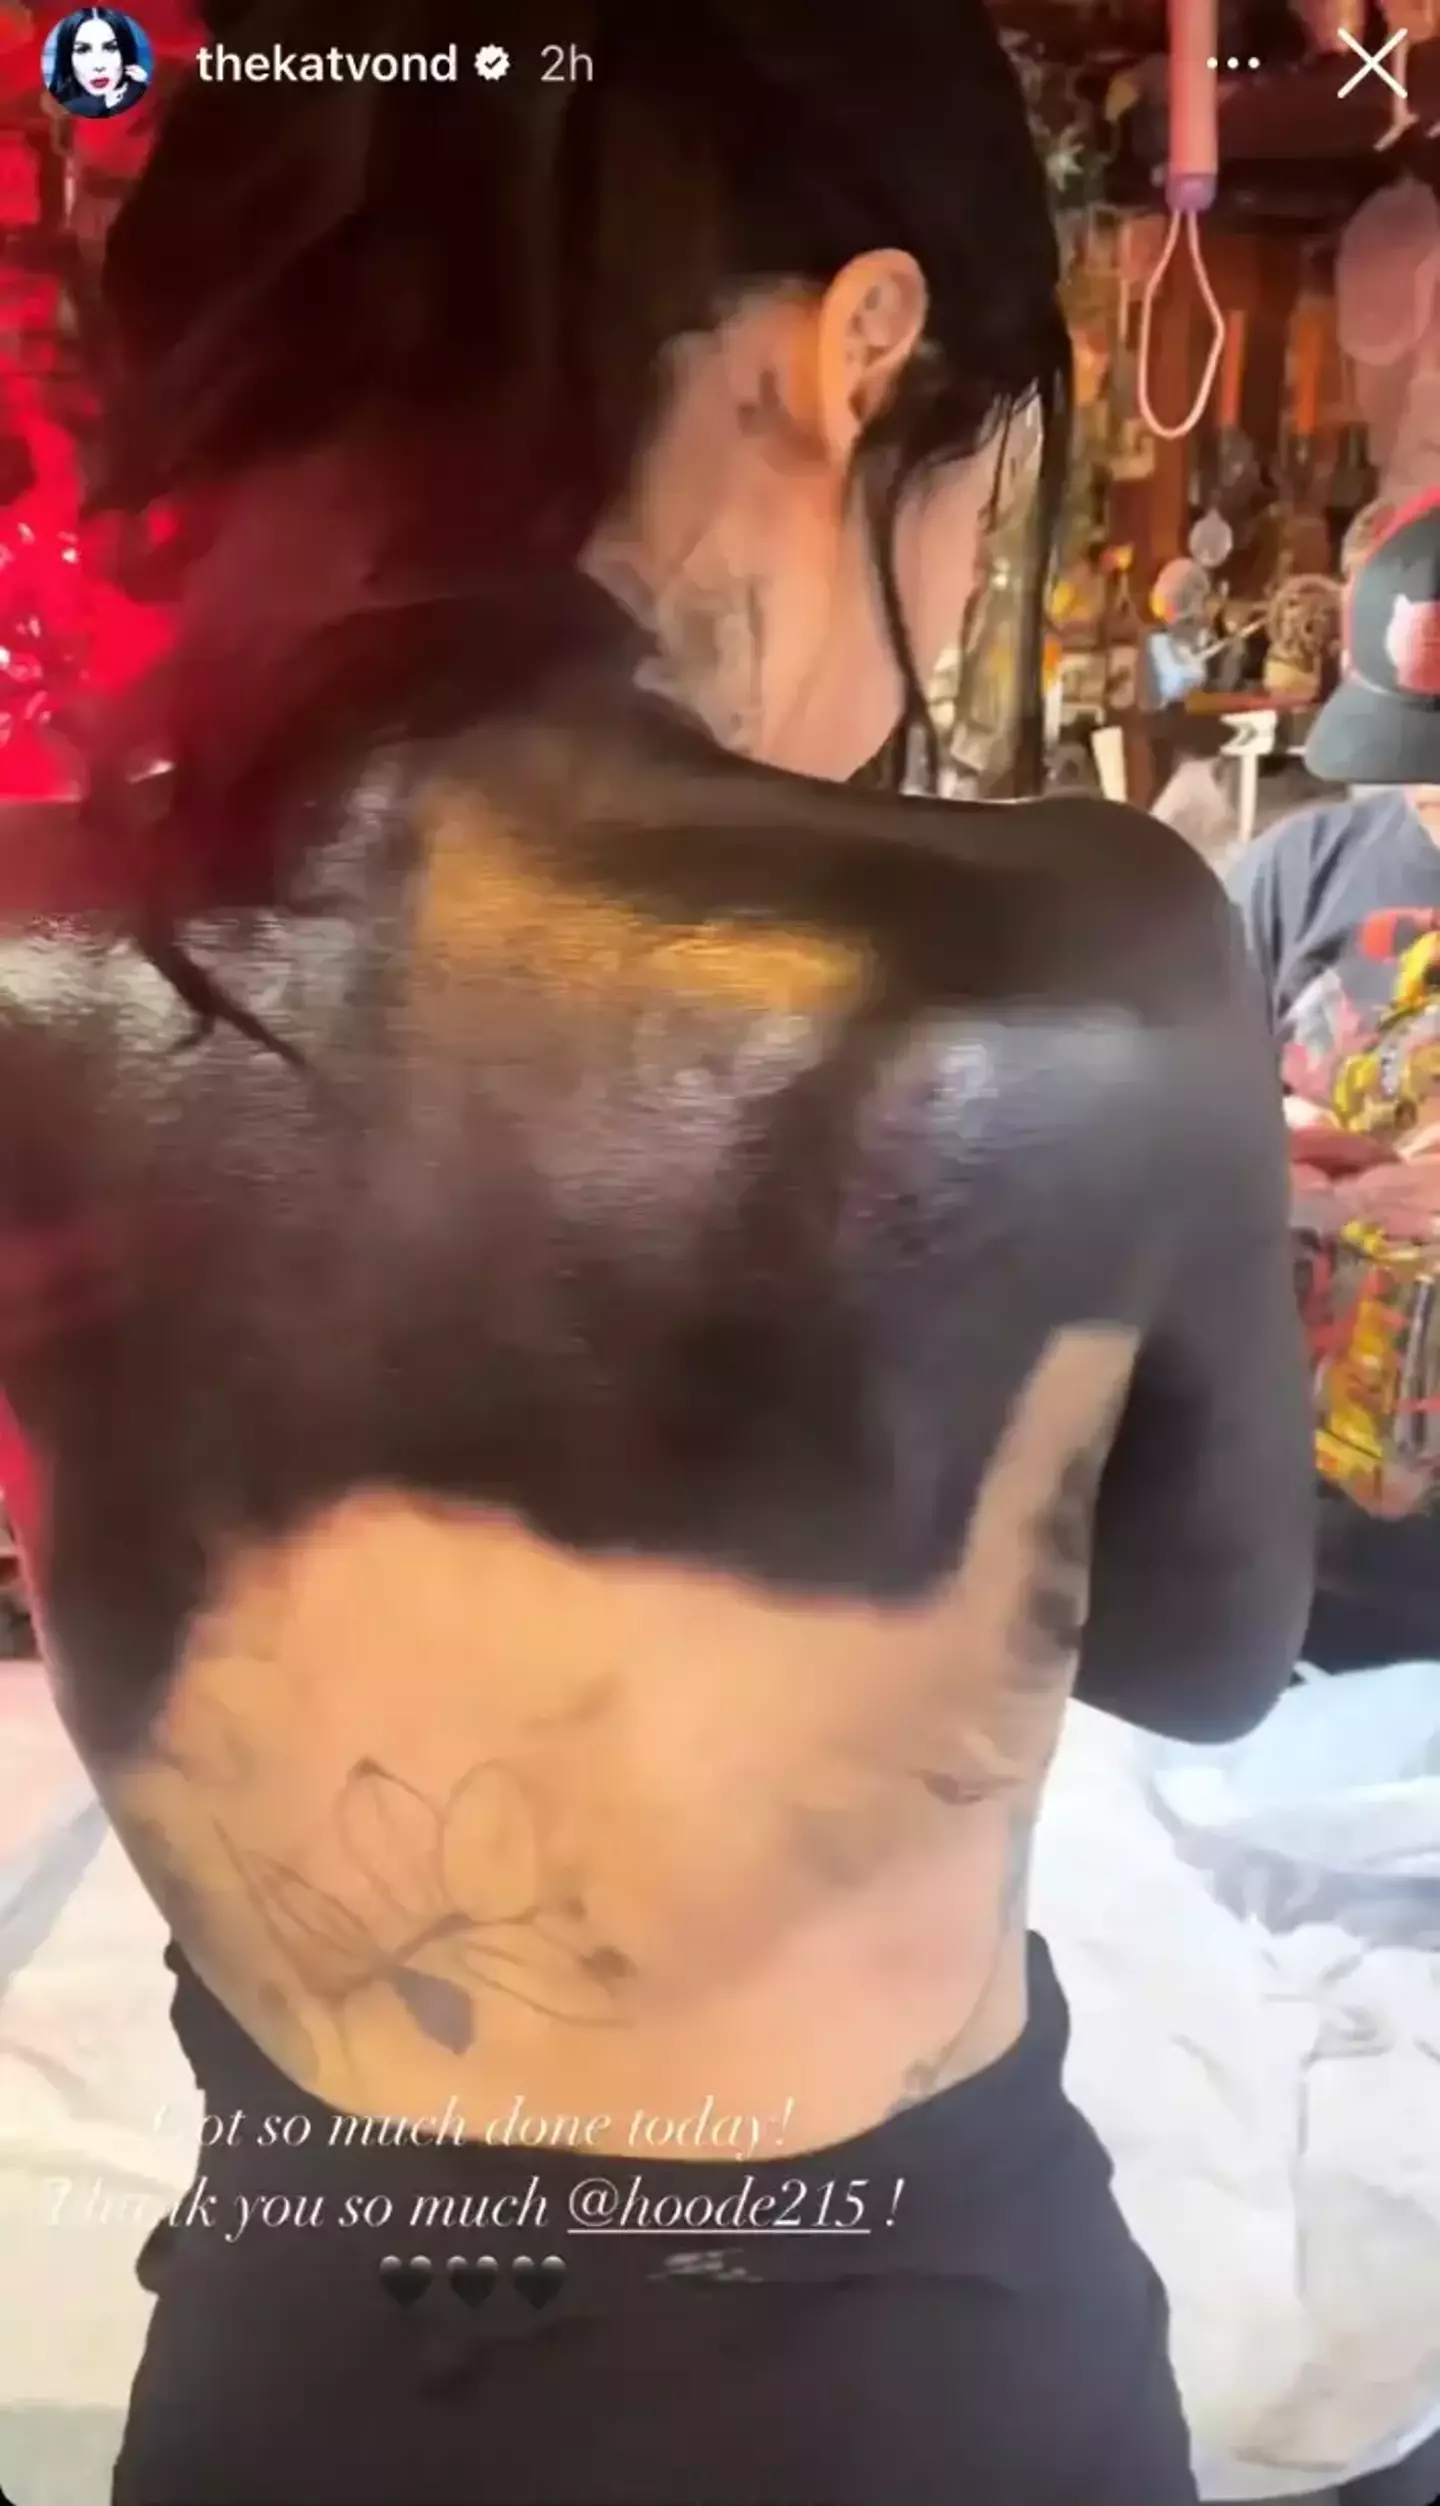 Kat covered her back tattoos with blackout ink. (Instagram/@thekatvond)